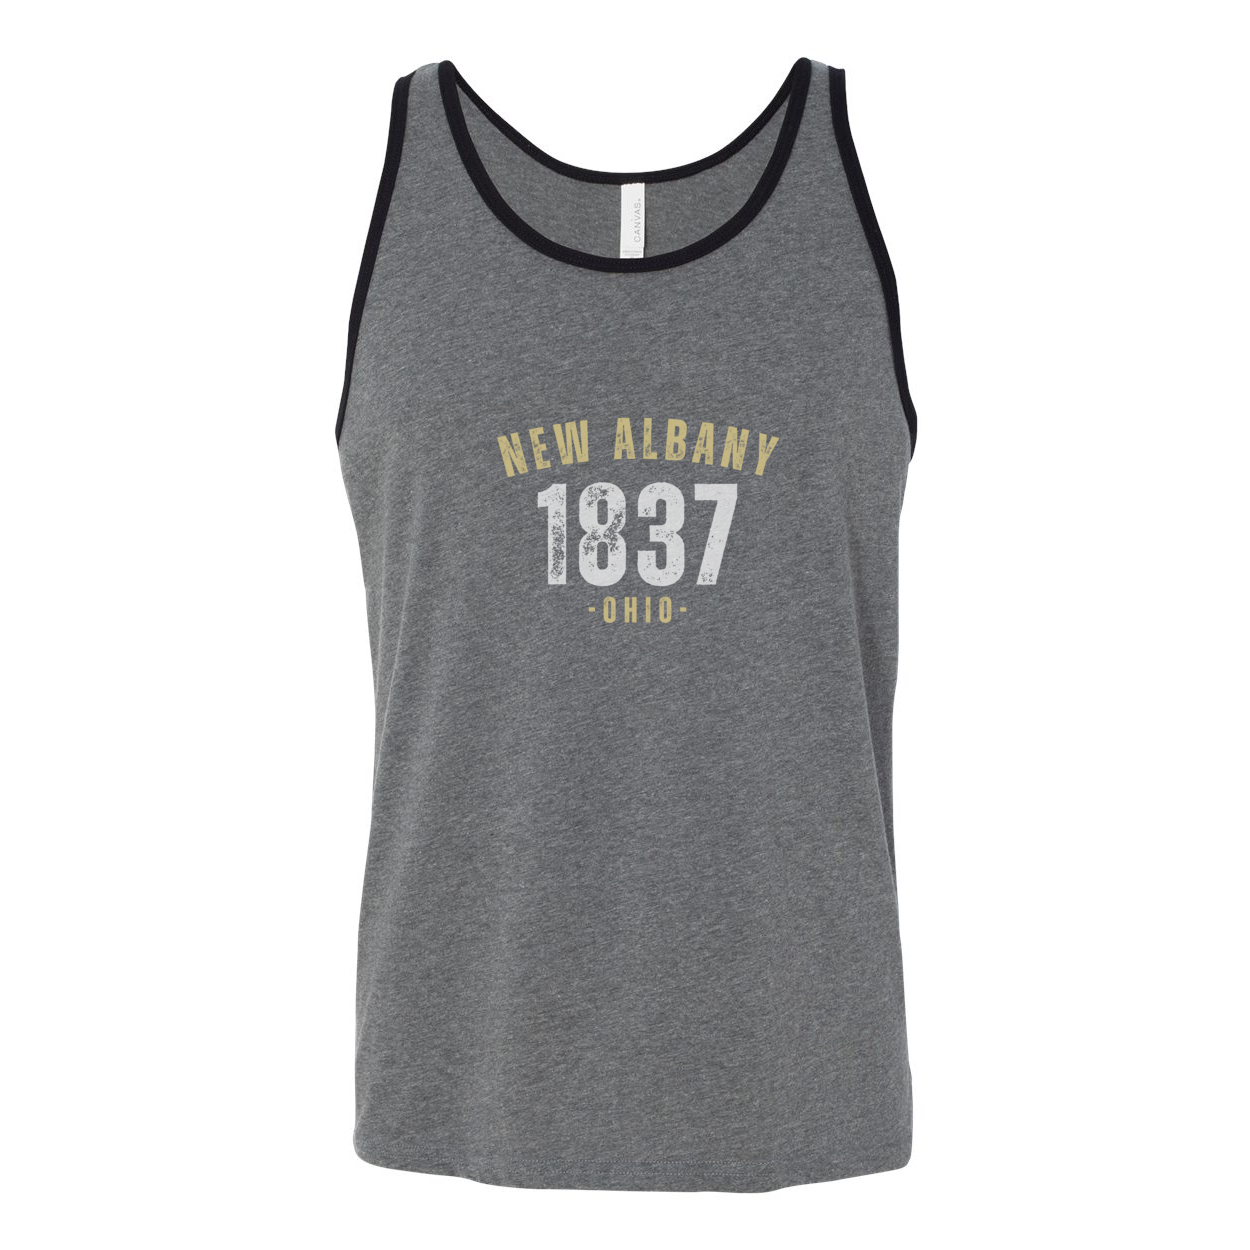 Adult Unisex Signature City Graphic Tank - New Albany Eagles